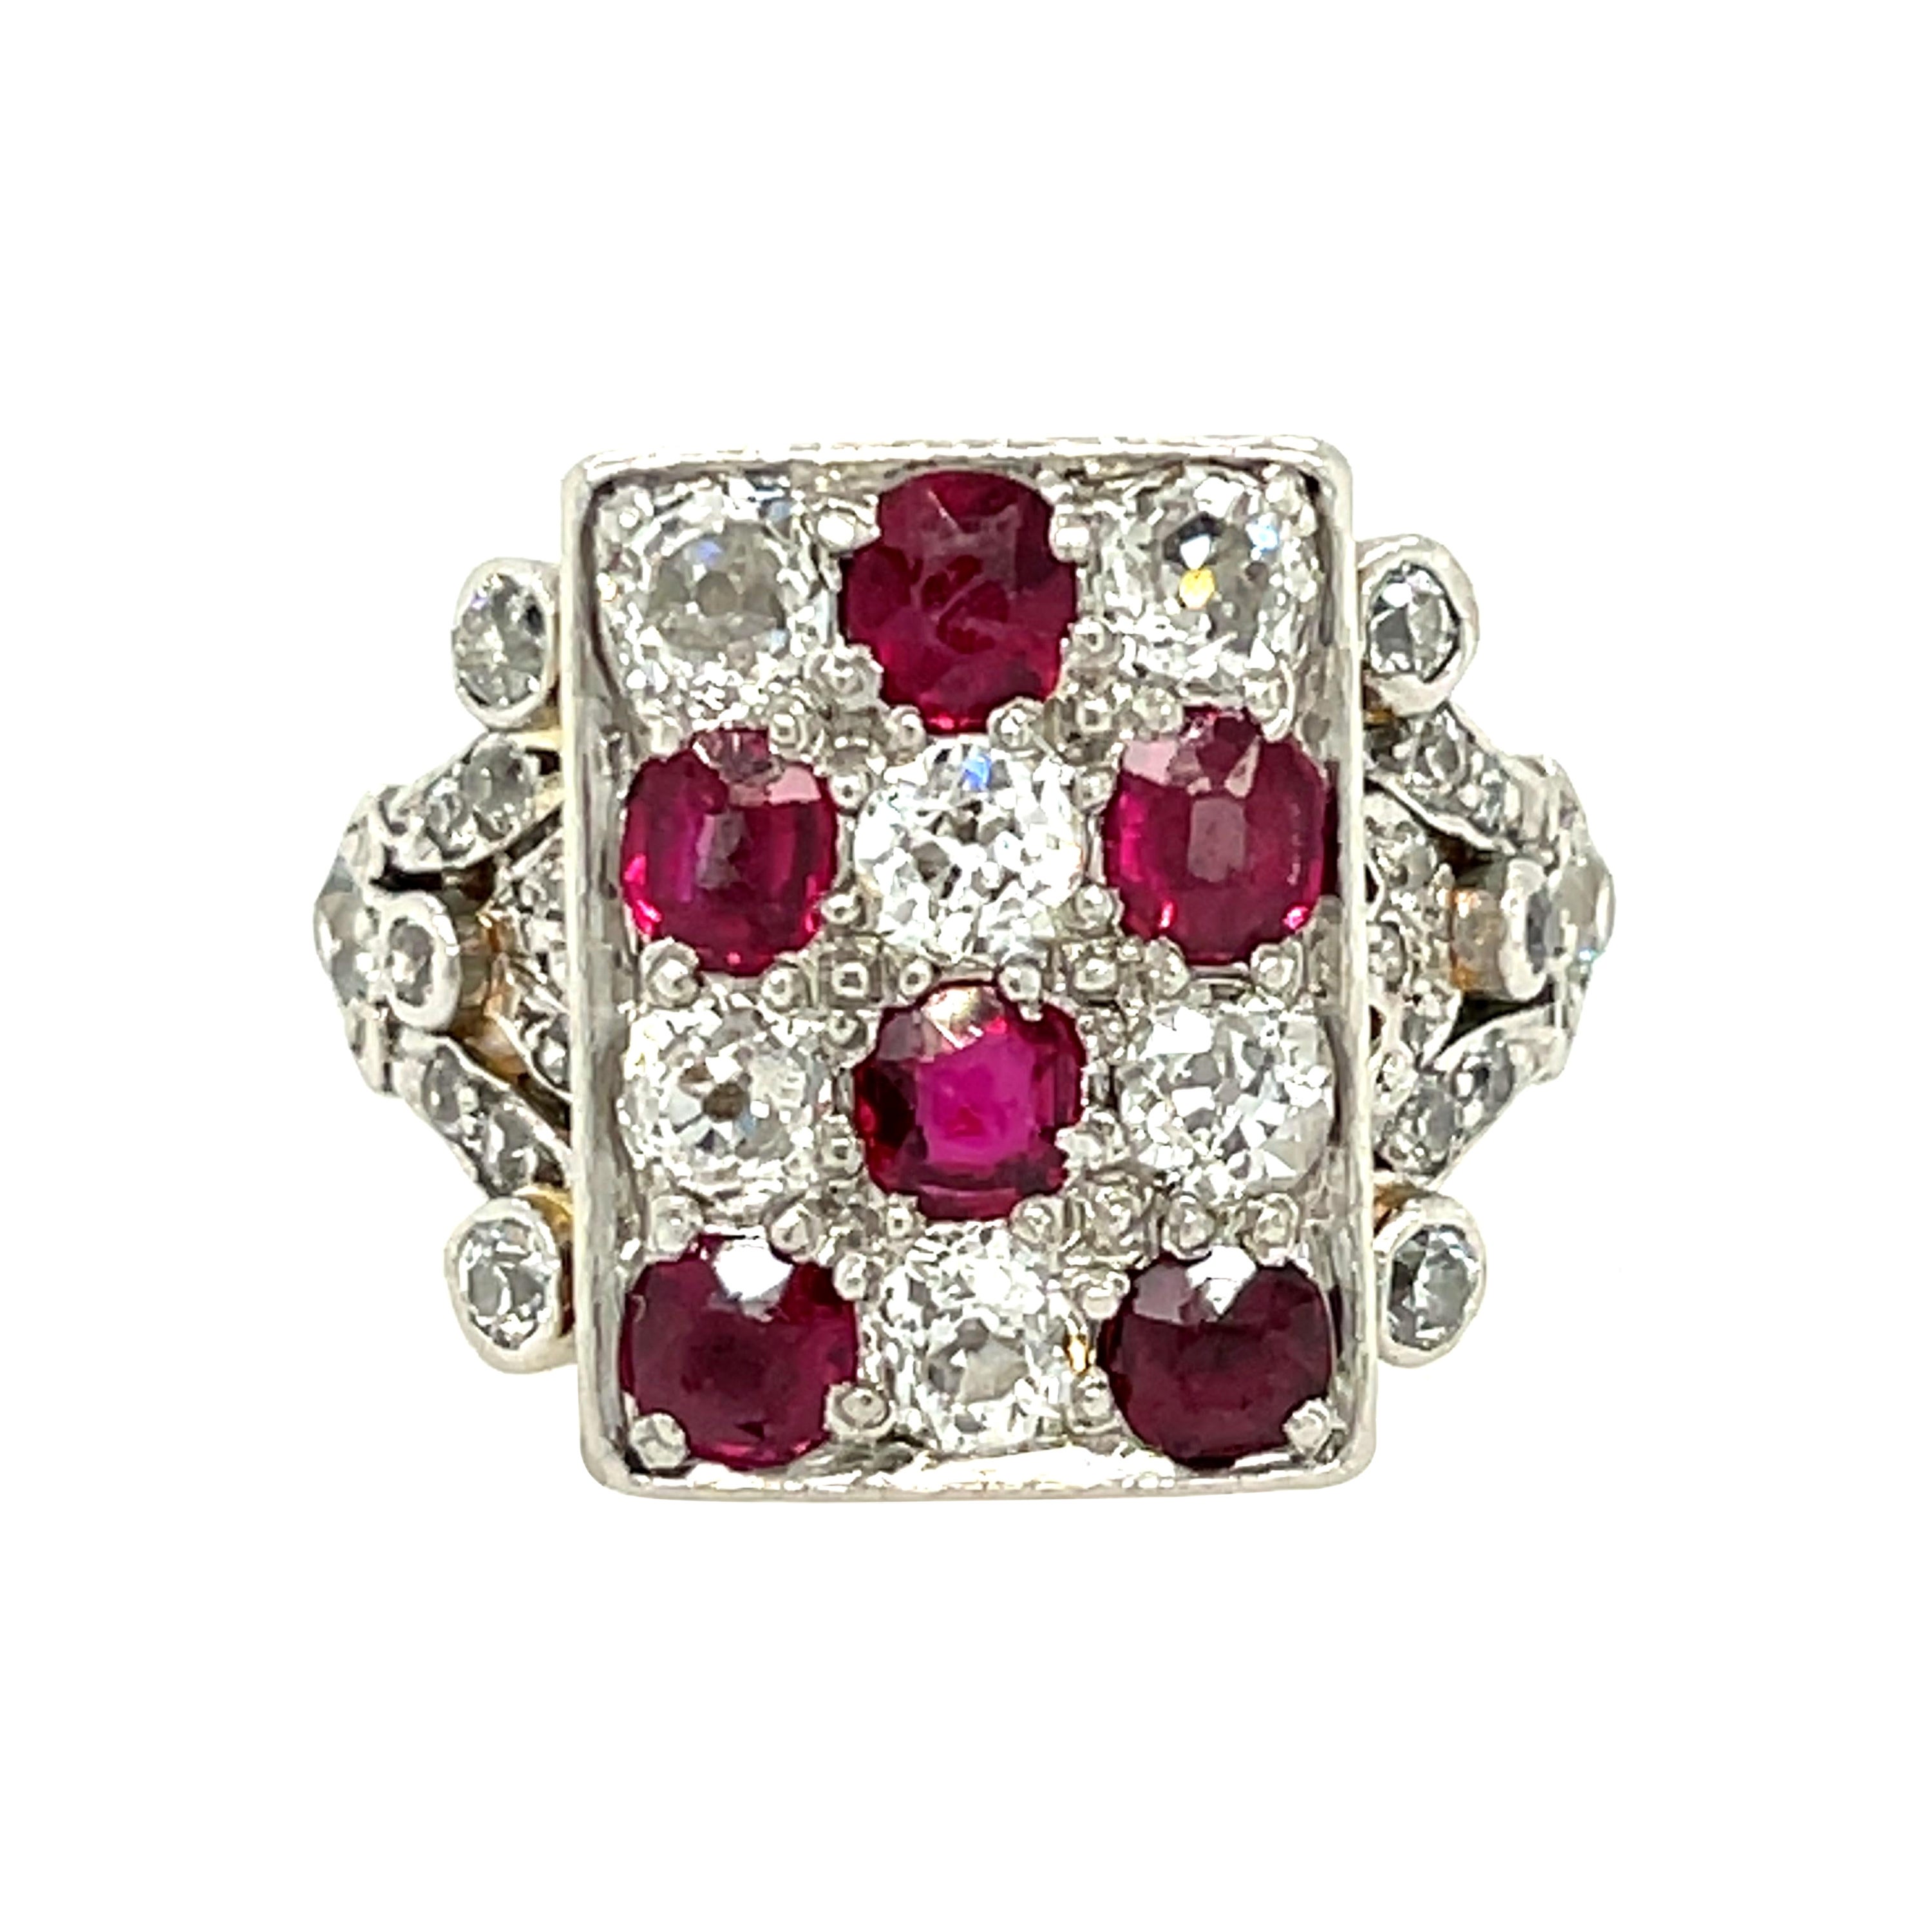 Antique Edwardian Platinum Topped Gold Ruby Diamond Checkerboard Ring